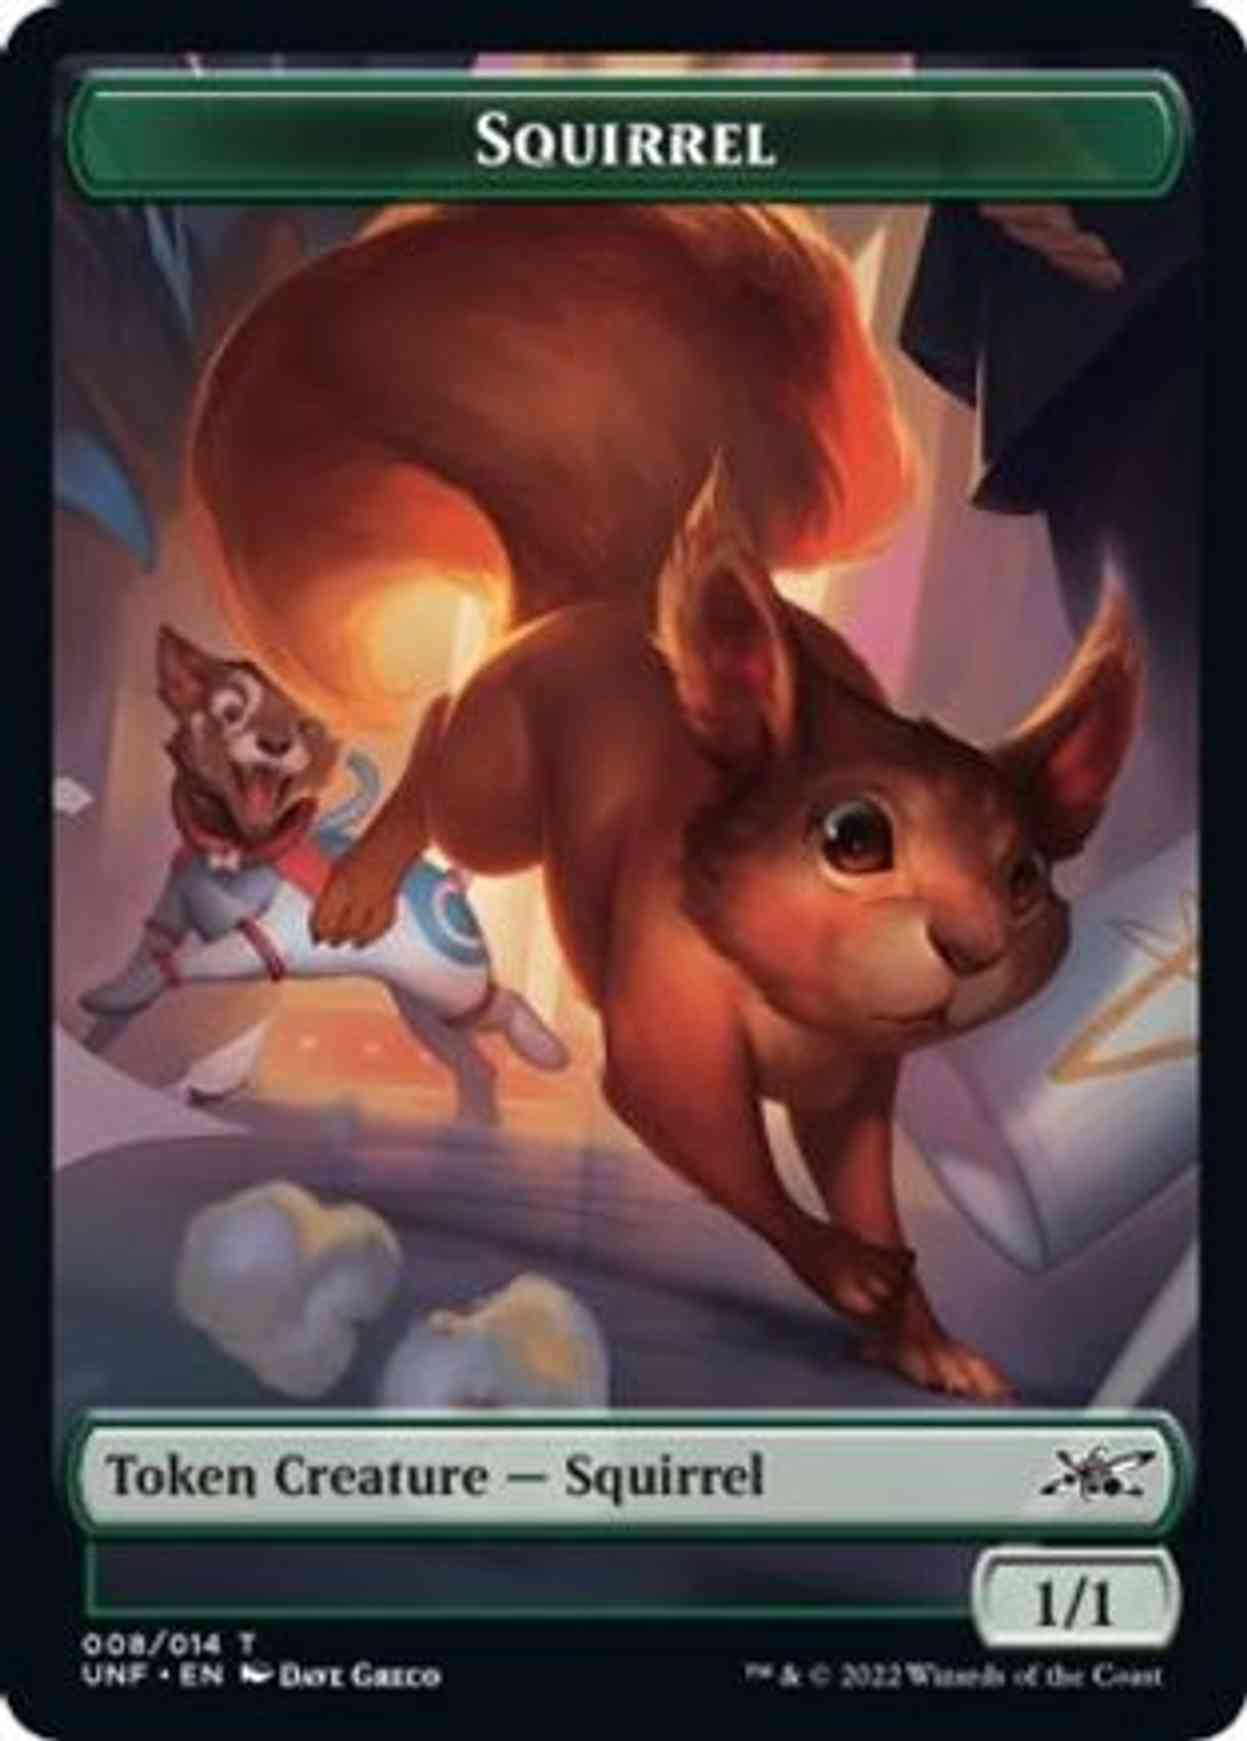 Squirrel // Treasure (012) Double-sided Token magic card front